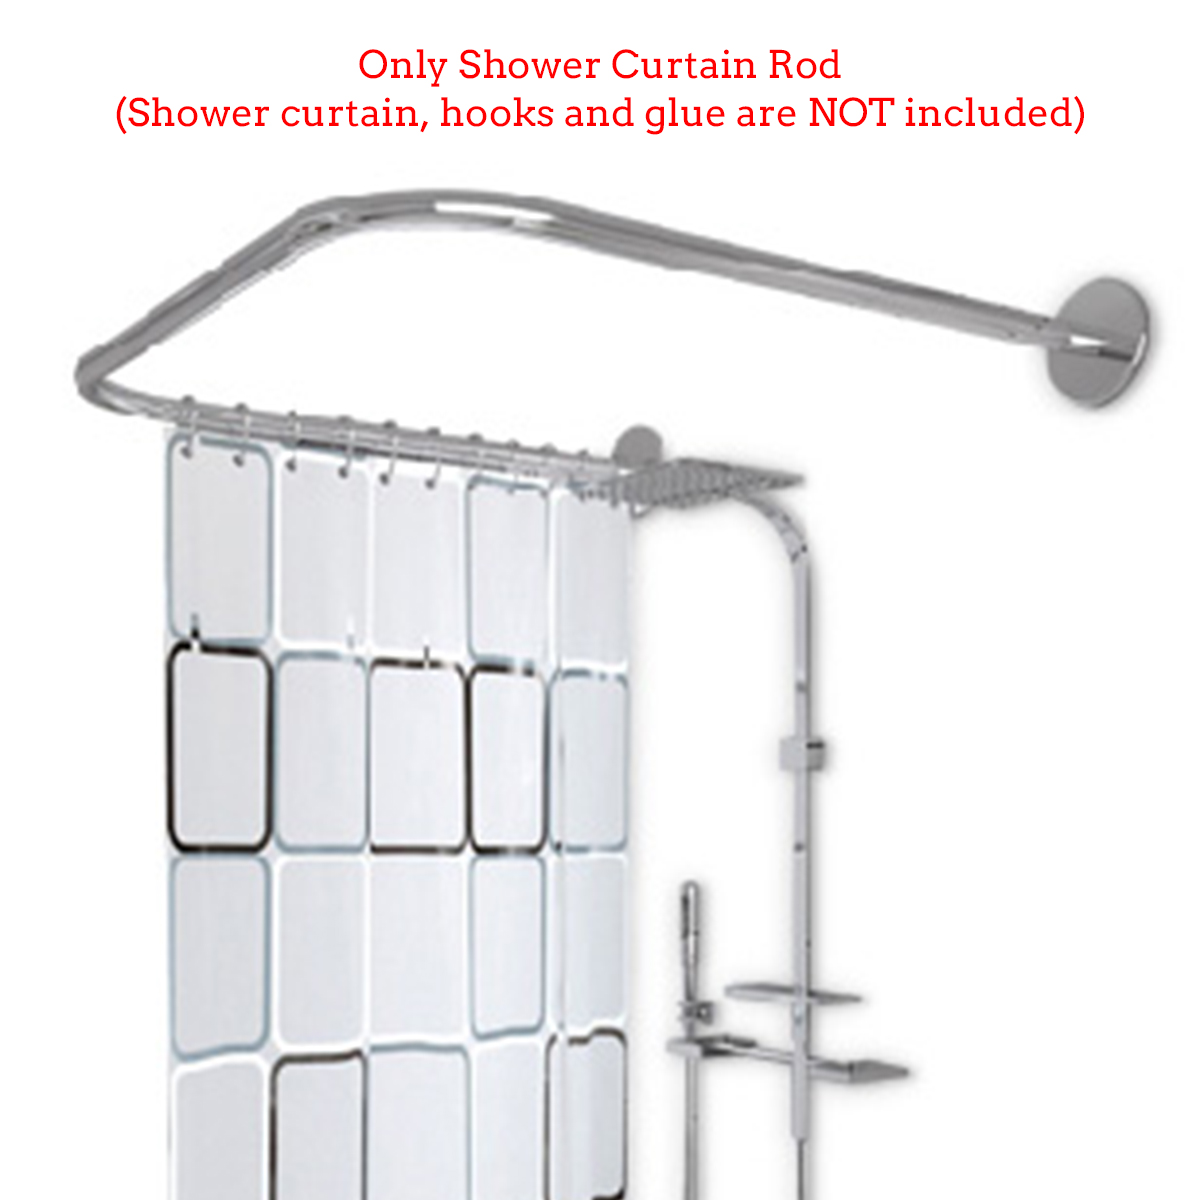 80cm 80 EEUK Shower Curtain Rod Curved Tension No Drill Adjustable U Shaped Shower Curtain Corner Rail Pole Wall Mounted 304 Stainless Steel for Bathroom Clothing StoreSilver-80 